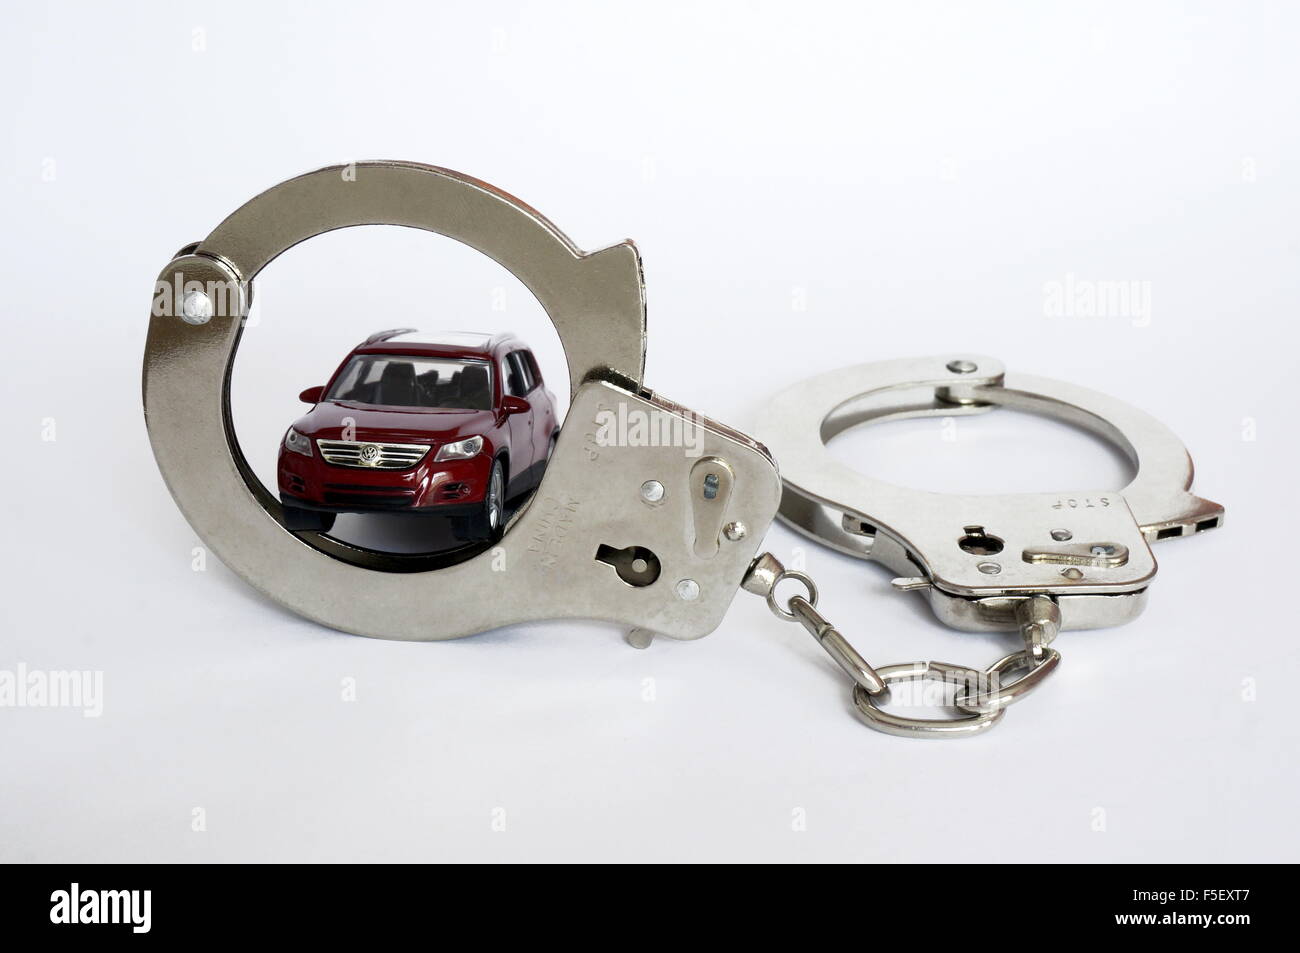 ILLUSTRATION - A Volkswagen car model 'VW Tiguan' behind handcuffs. The photo was taken on 15 October 2015. Photo: S. Steinach - NO WIRE SERVICE - Stock Photo